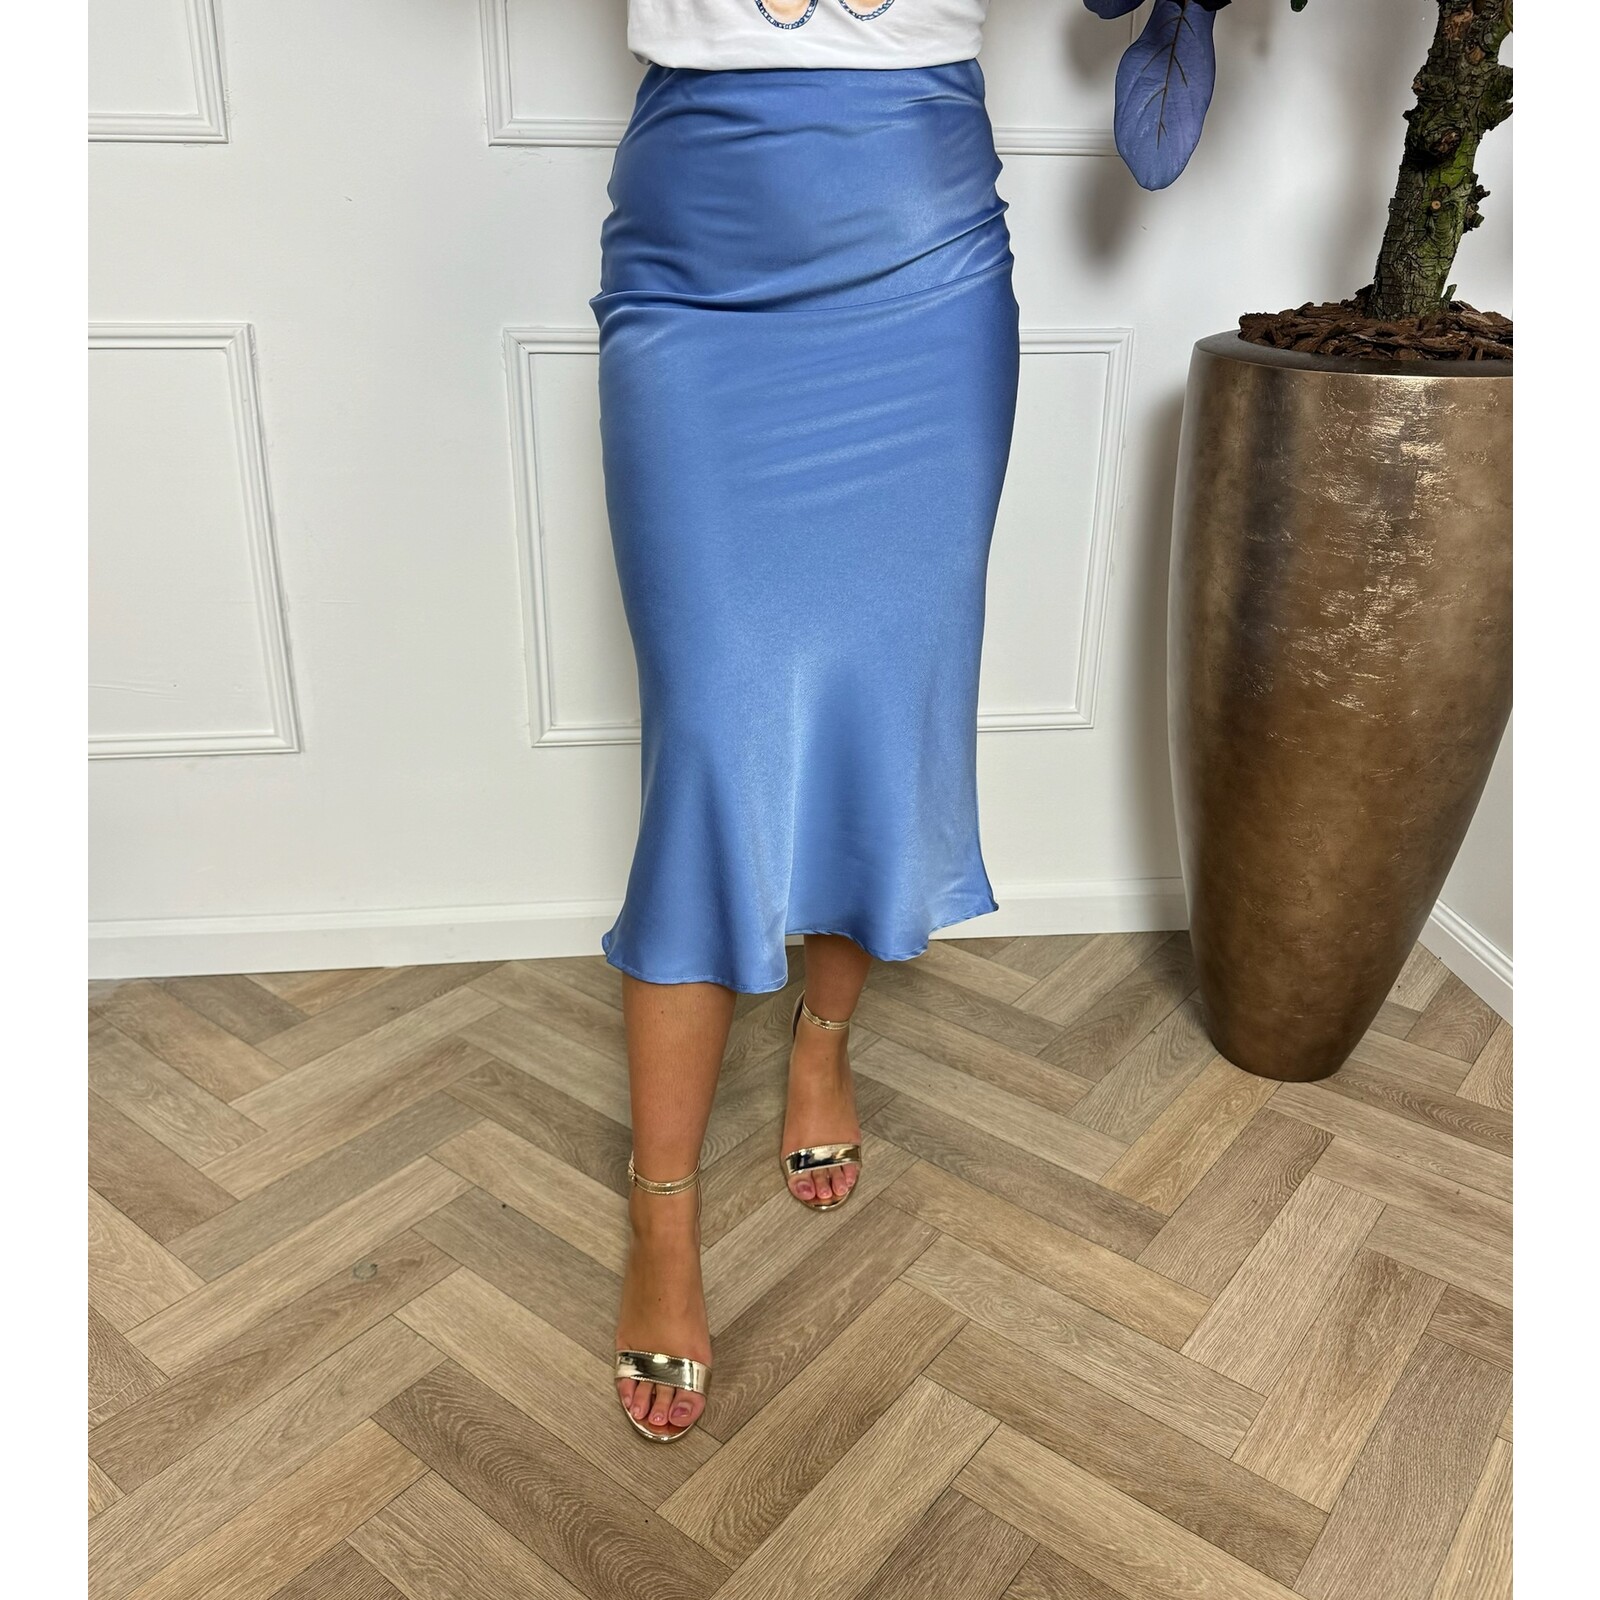 Perfect Satin Skirt Blue  SD1511 (WEB ONLY)